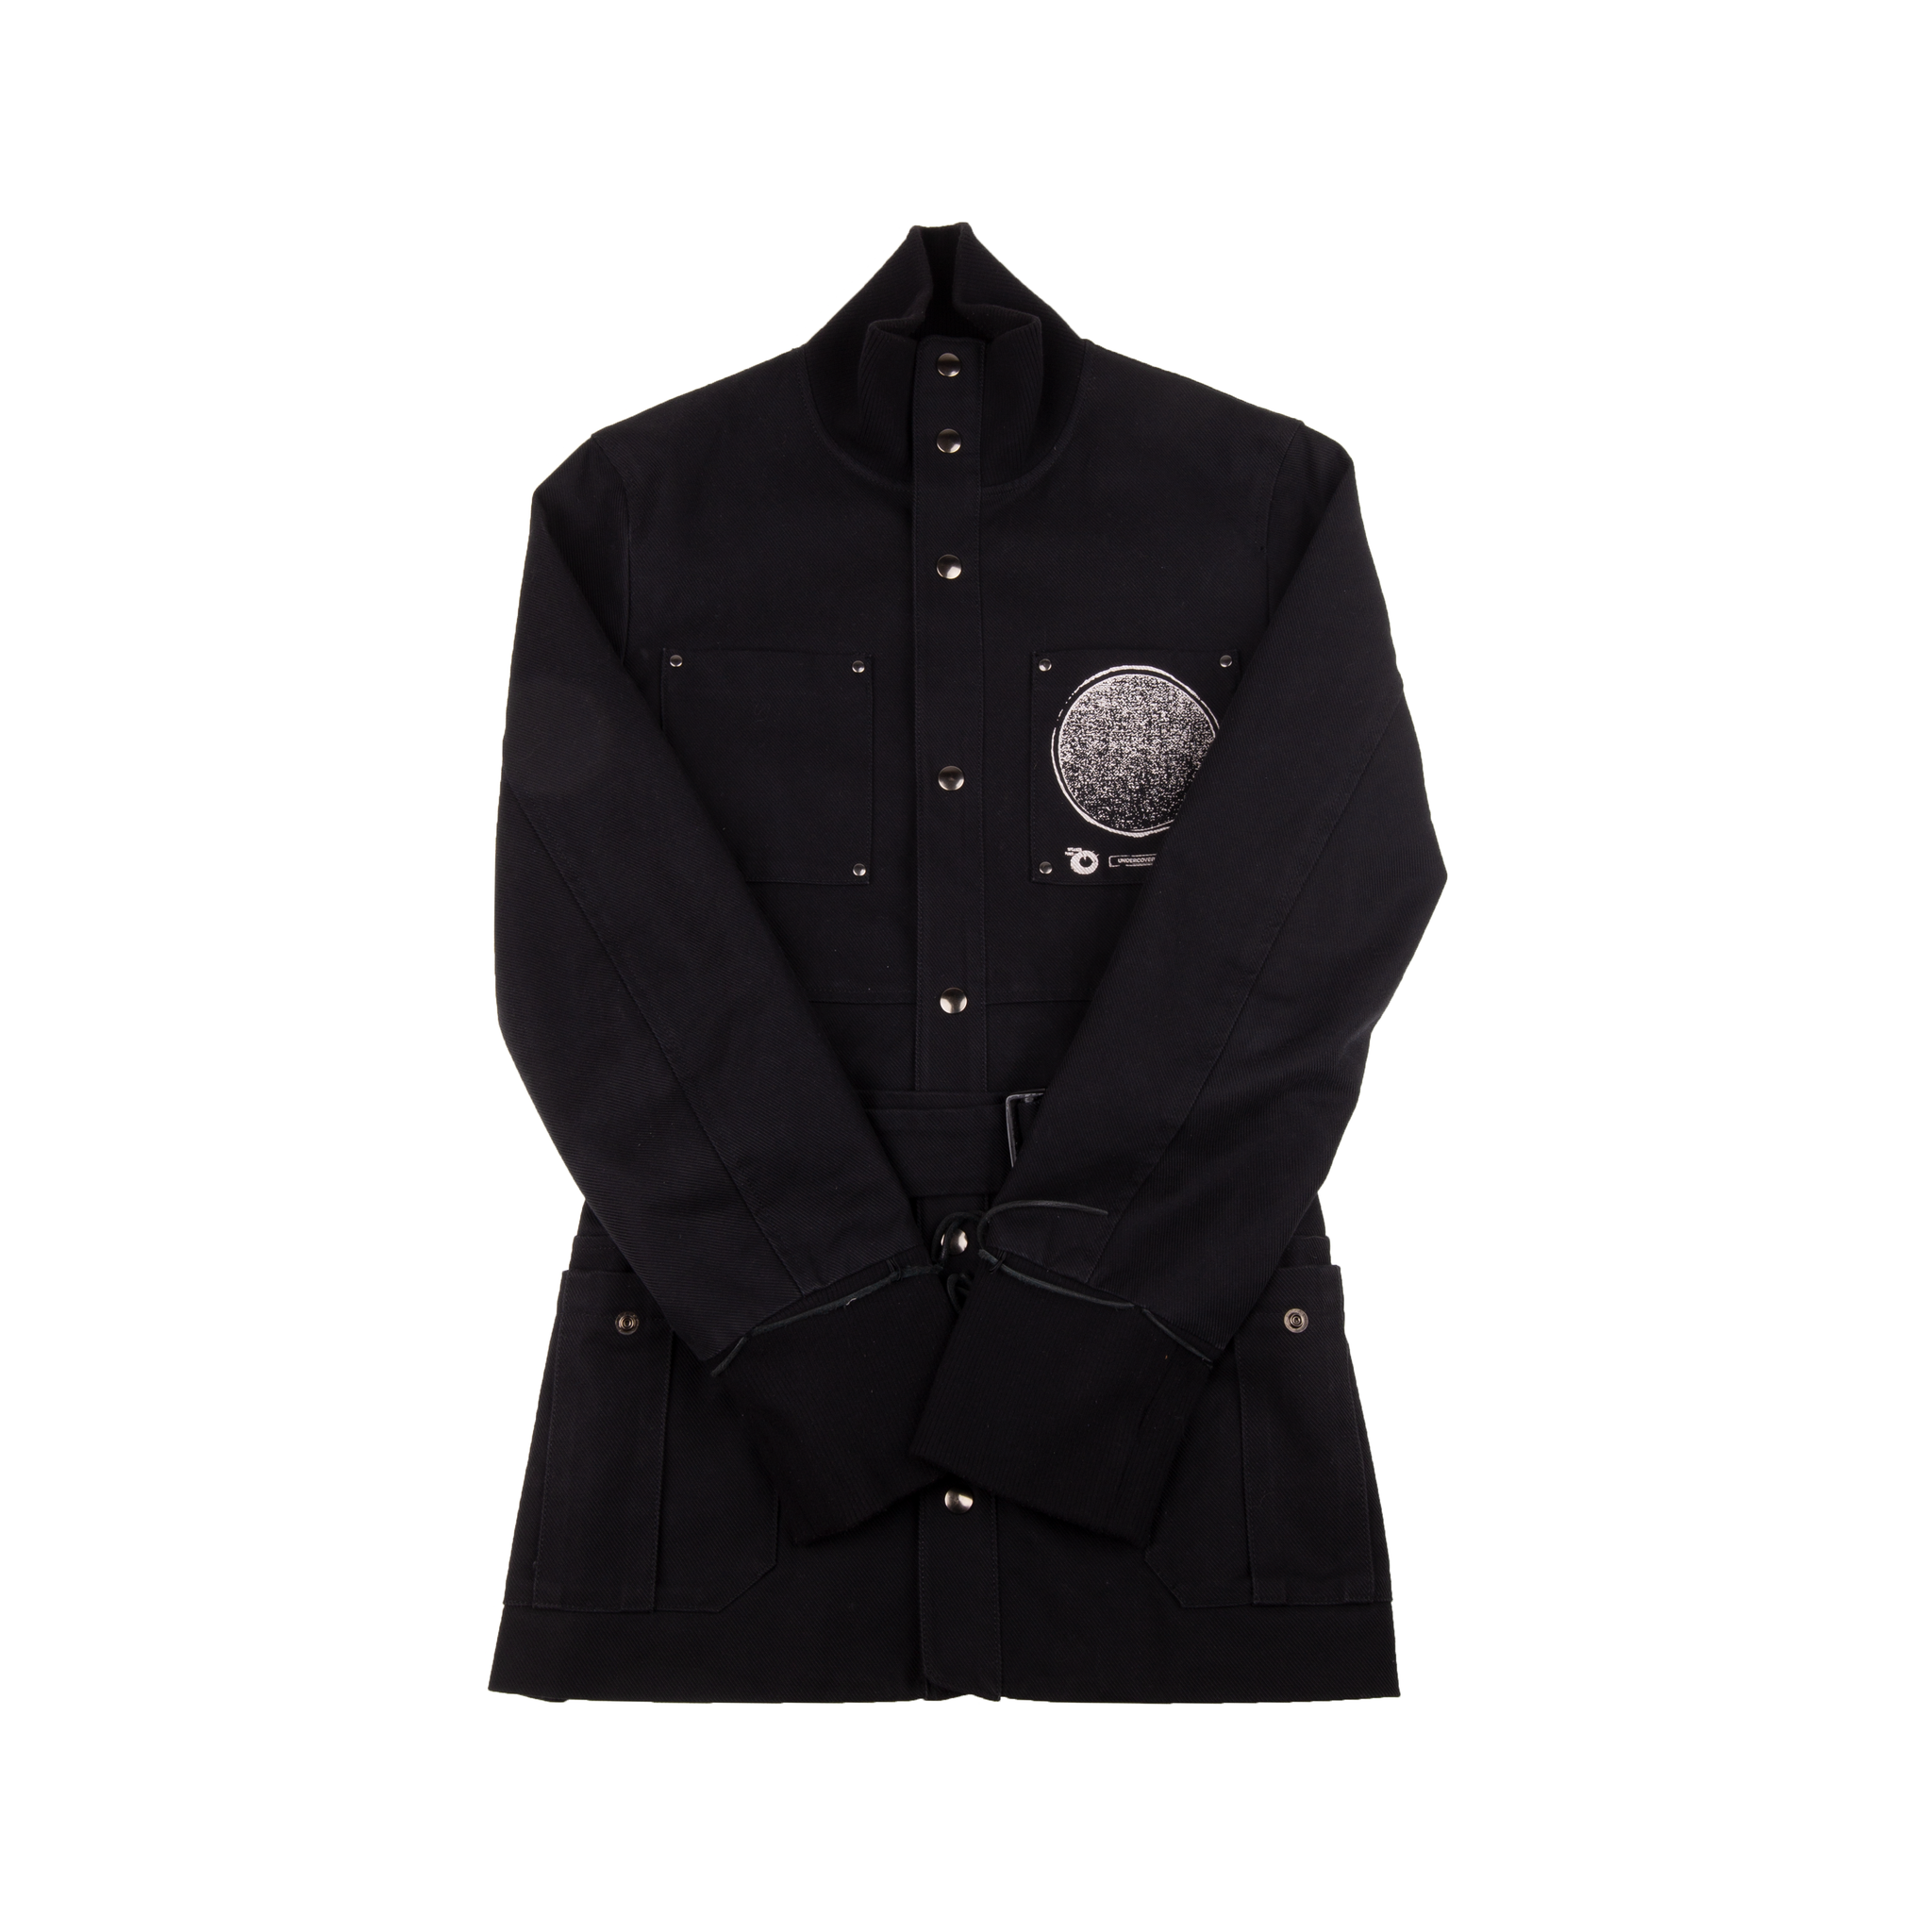 Undercover AW07 Black Moon Distortion Jacket